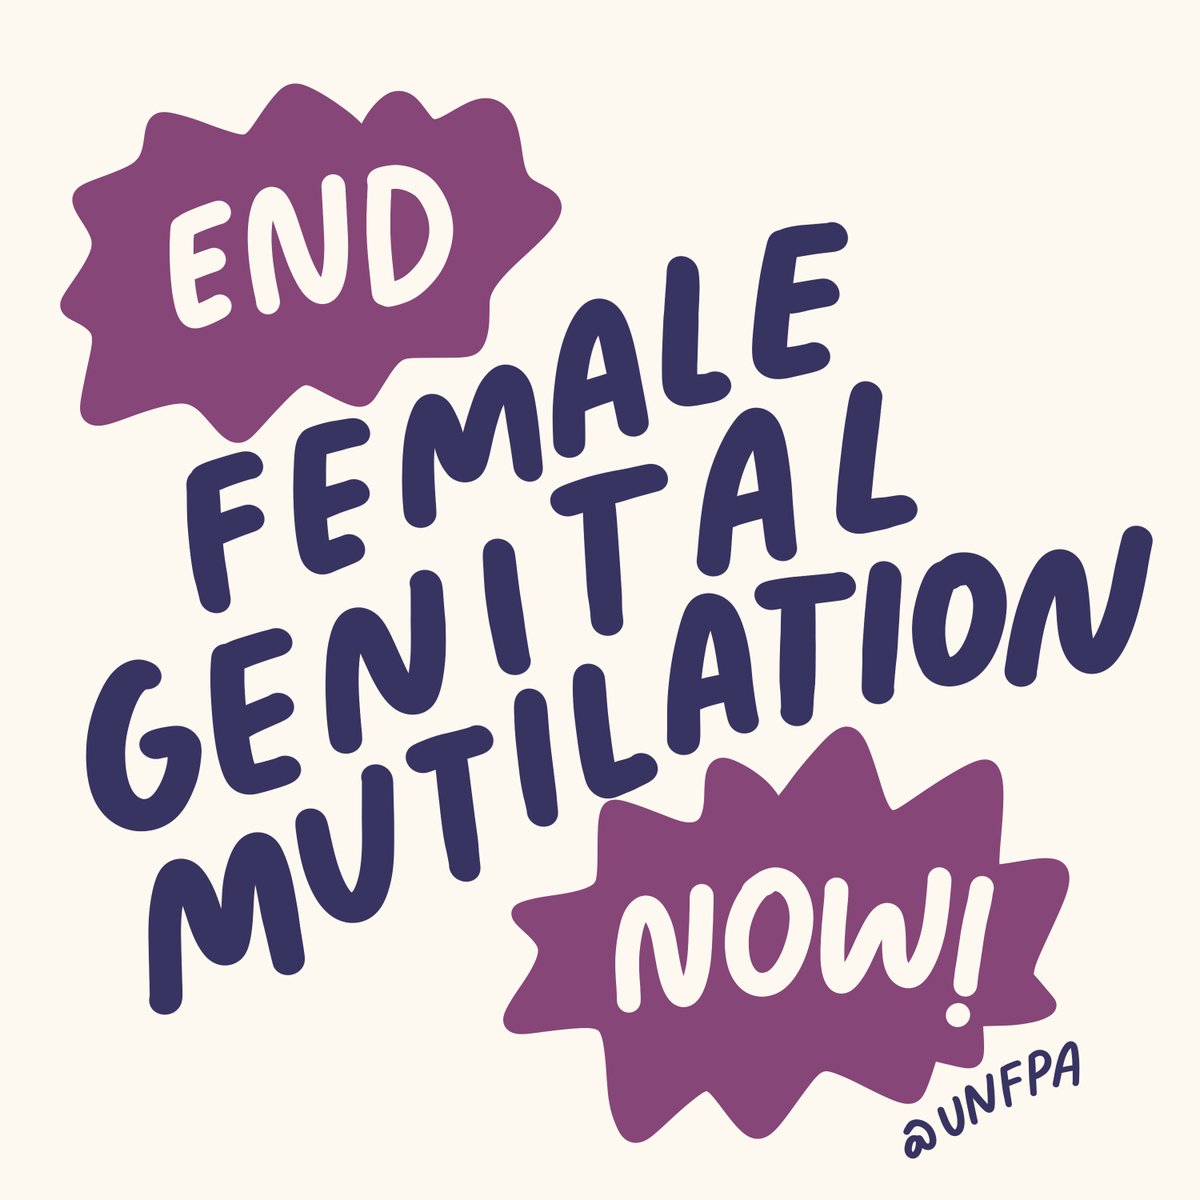 test Twitter Media - Globally, more than 200 million girls & women alive today have undergone some form of female genital mutilation (FGM).

On Monday's #EndFGM Day, learn how @UNFPA is working to protect women & girls from this human rights abuse. https://t.co/xicMqnjsj2

#StandUp4HumanRights https://t.co/6qAFoh5iLu